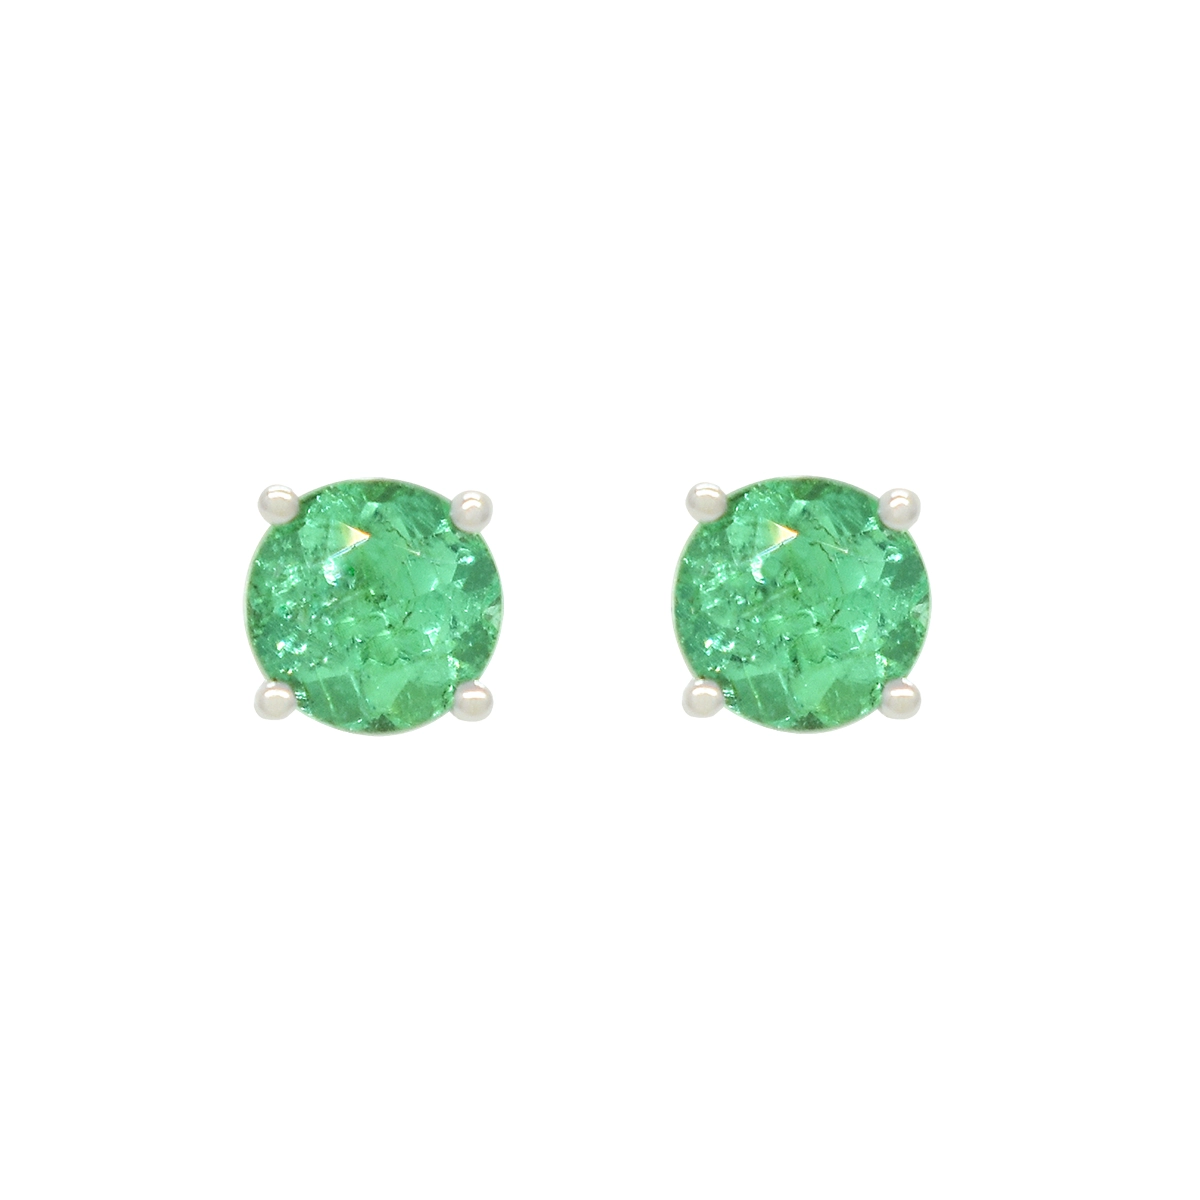 Round stud earrings with two beautiful natural Colombian emeralds in a stunning medium green color beautifully set in a solid 18K white gold setting